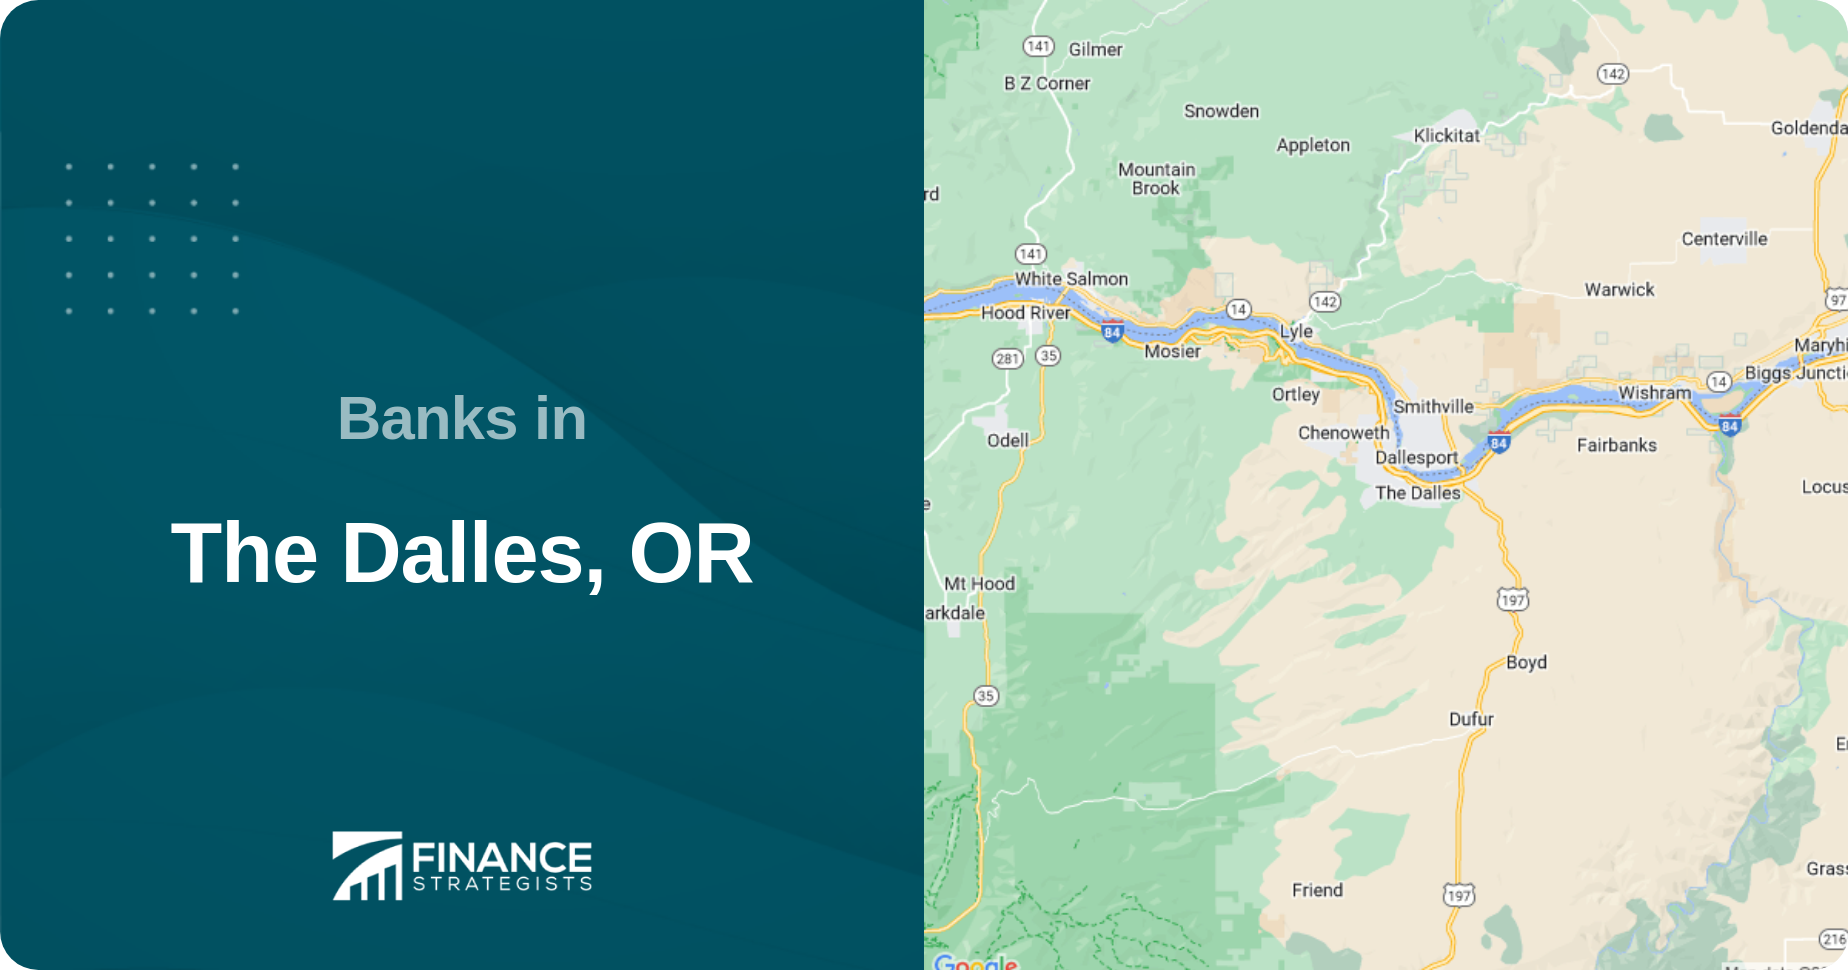 Banks in The Dalles, OR